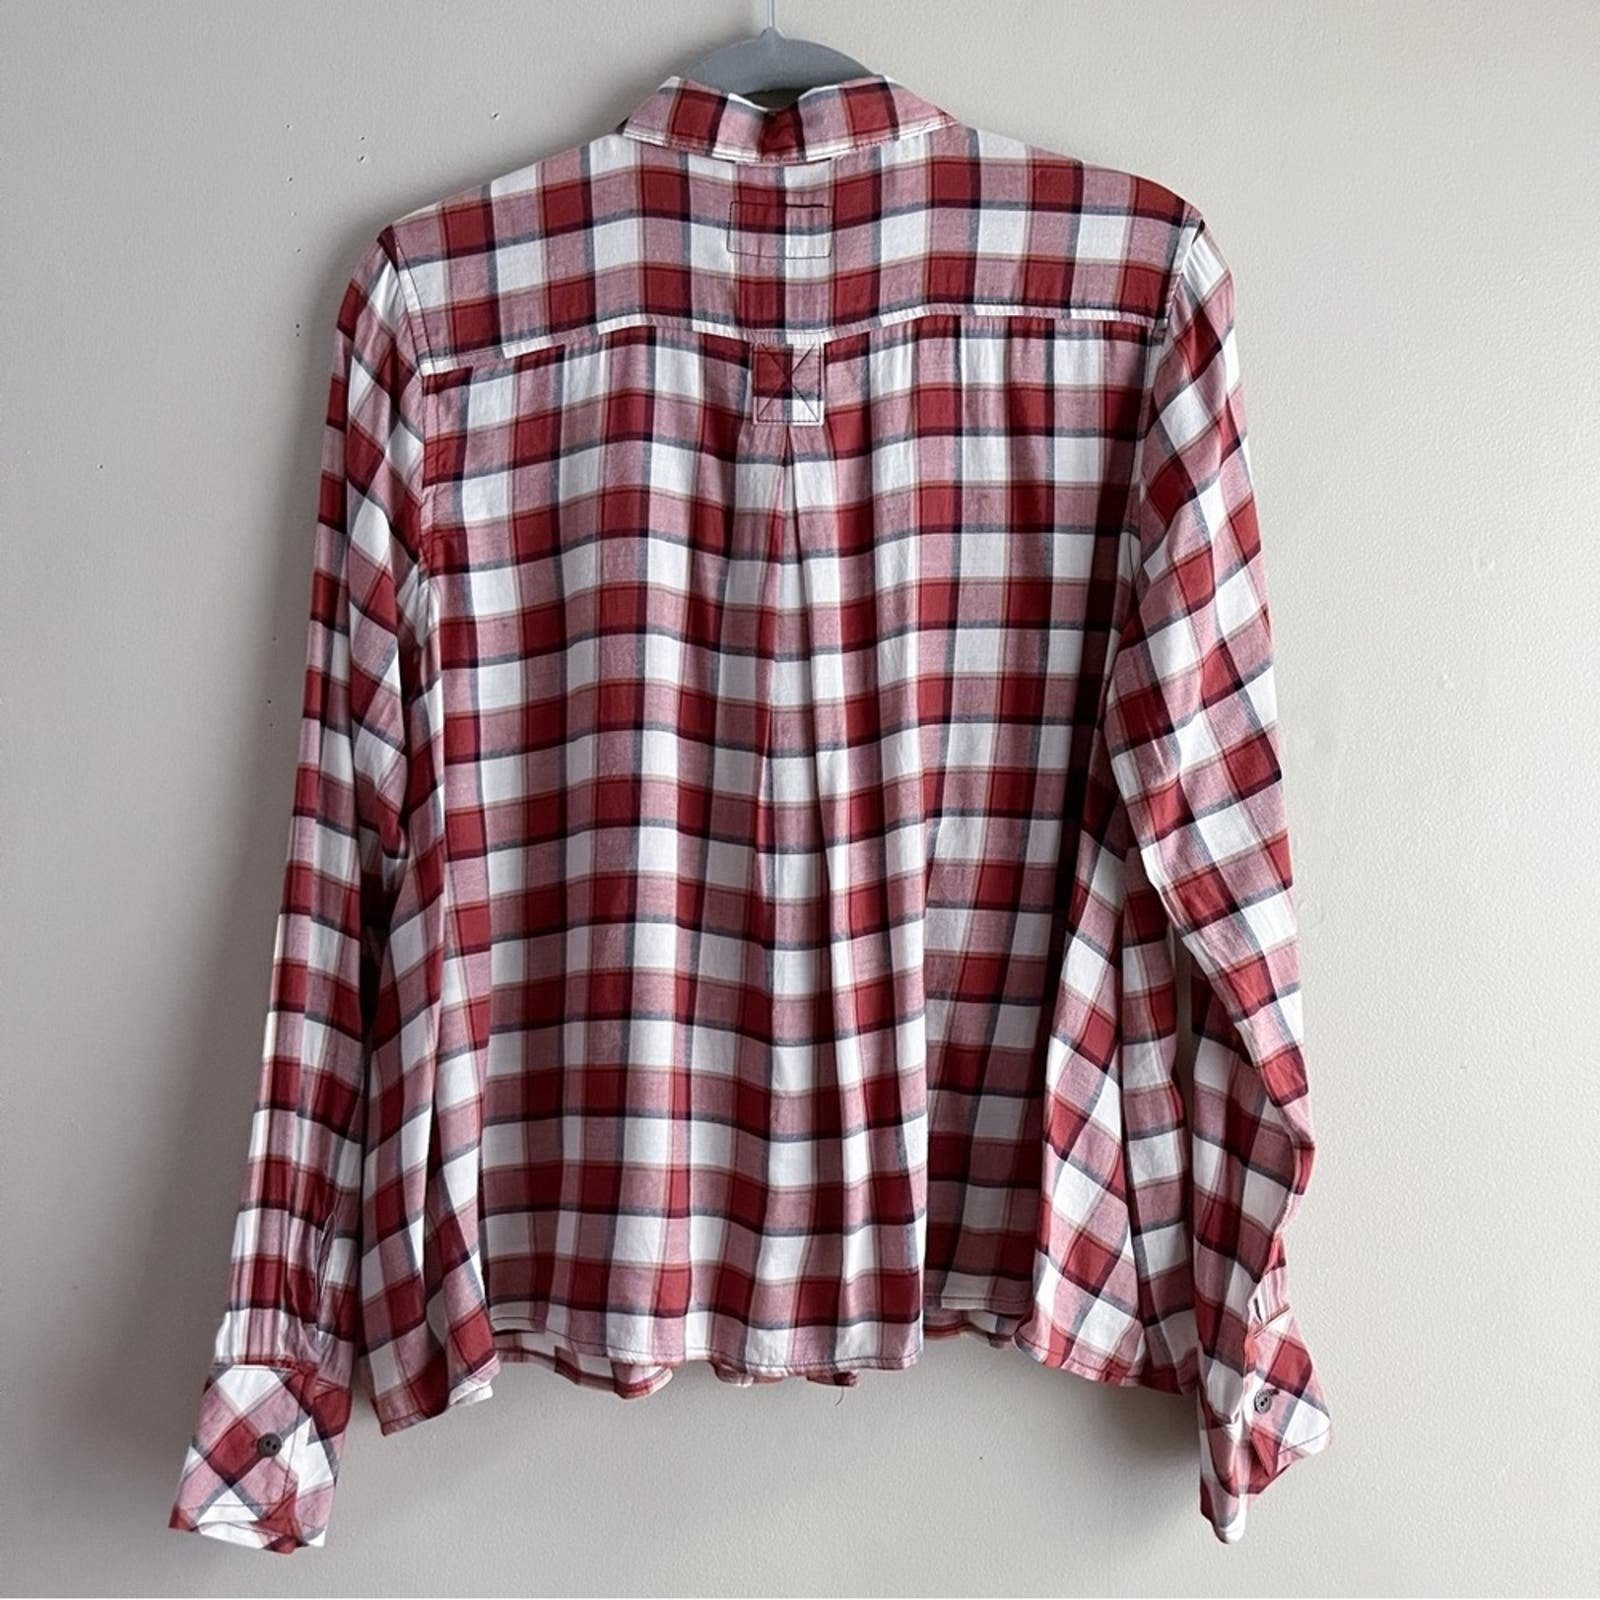 Current/Elliott Lucy Tuck Button Front Blouse in Danika Red Plaid, Size 2 FsBmnizAW